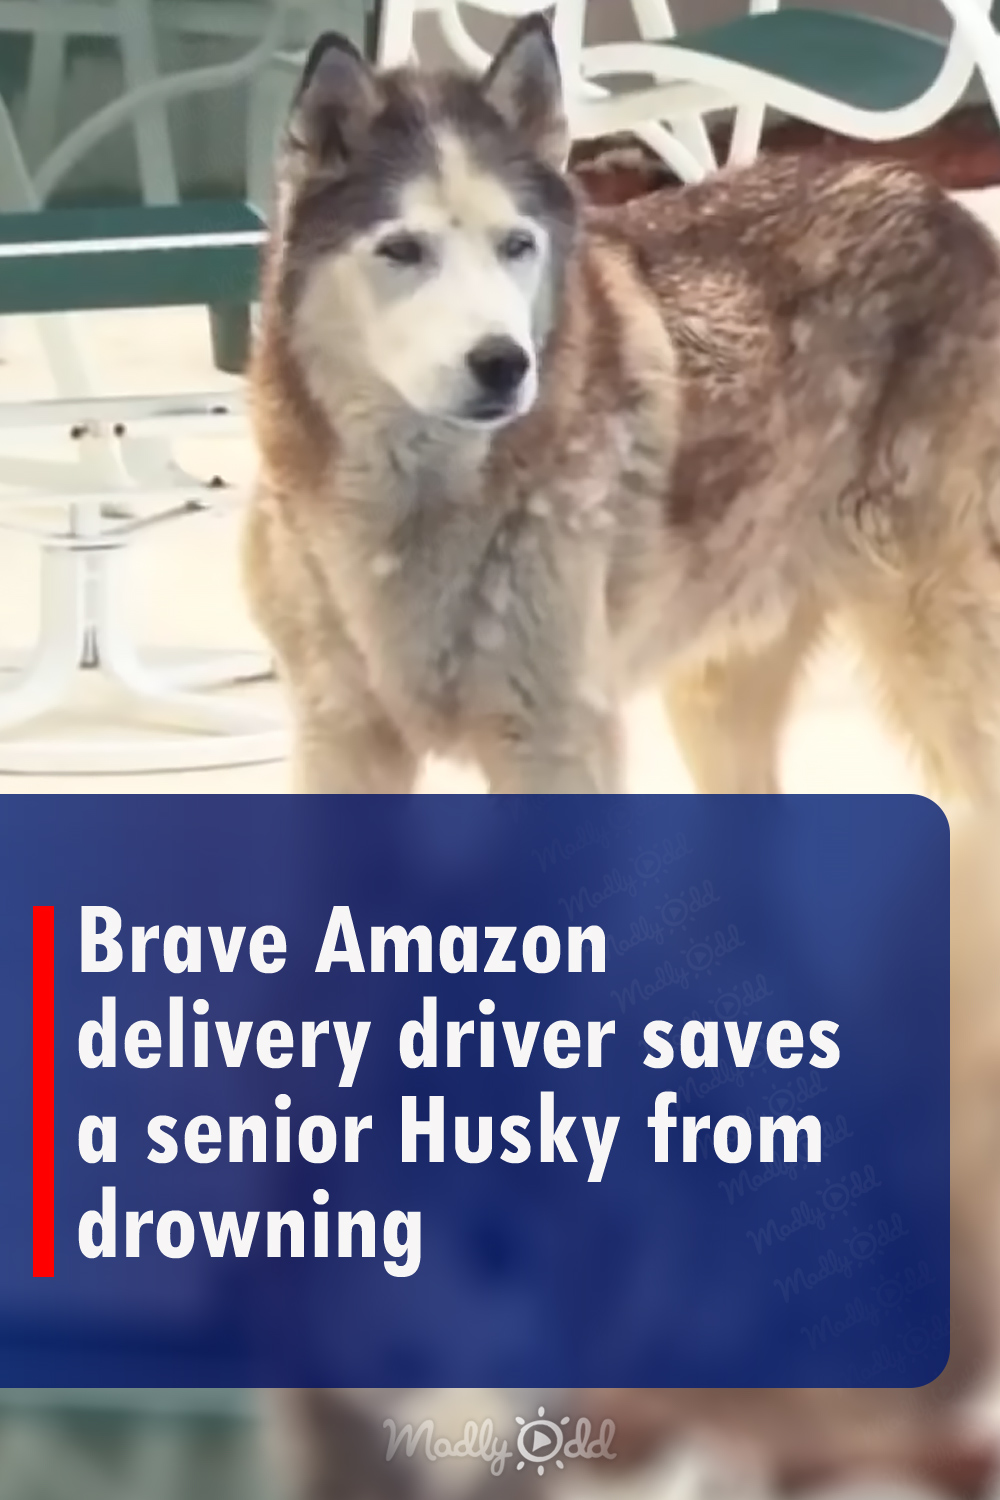 Brave Amazon delivery driver saves a senior Husky from drowning